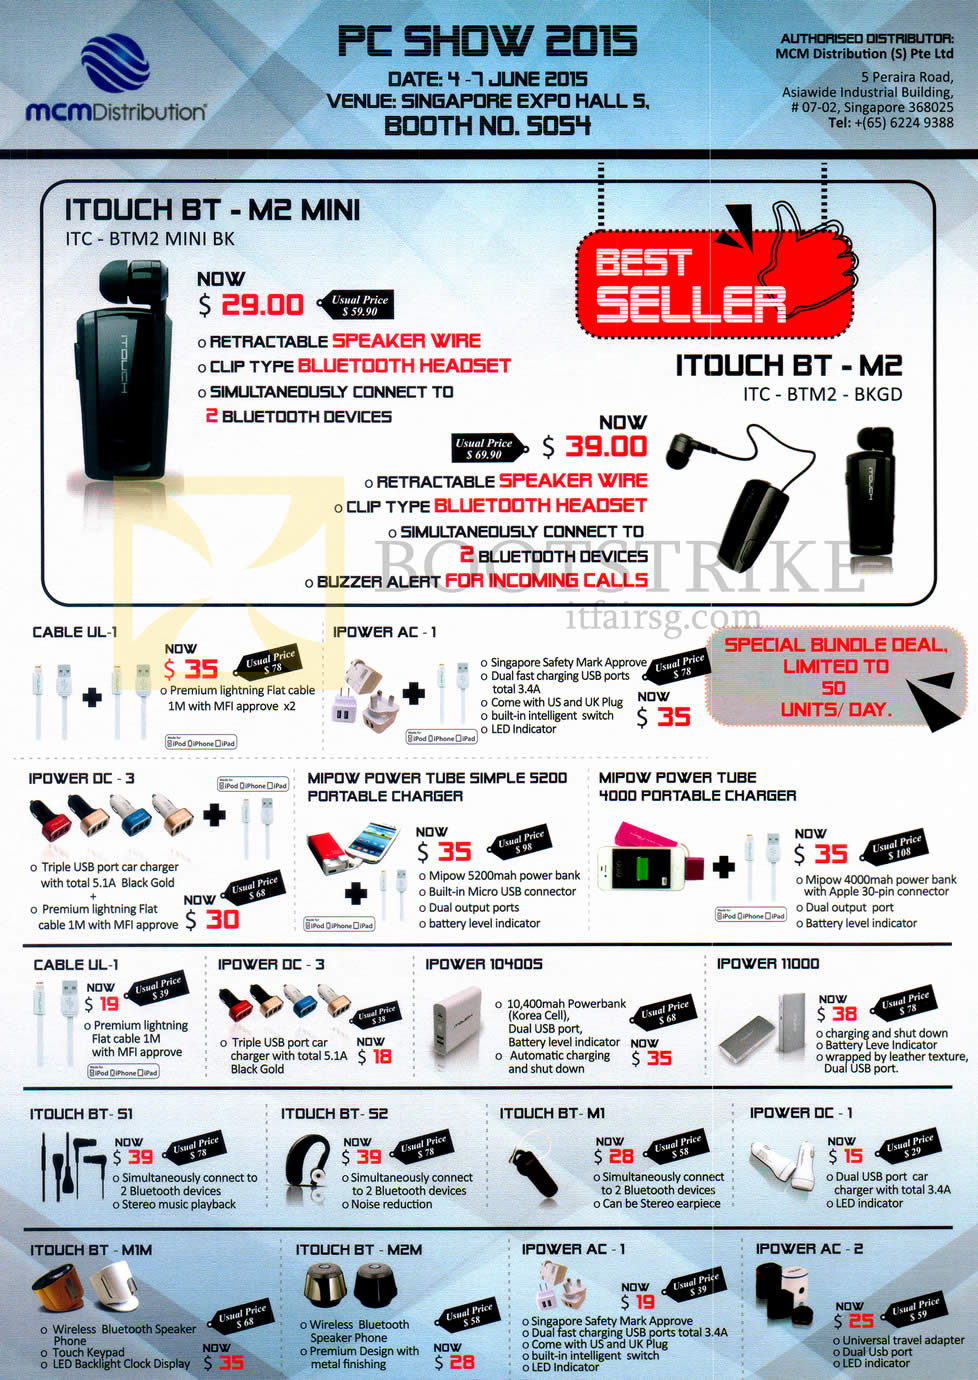 PC SHOW 2015 price list image brochure of MCM Distribution Accessories, Charger, Lightning, Itouch BT-M2 Mini, Itouch Bt-M2, Cable UL-1, IPower AC-1, 2, OC-3, 10400S, 11000, BT-M1M, M2M